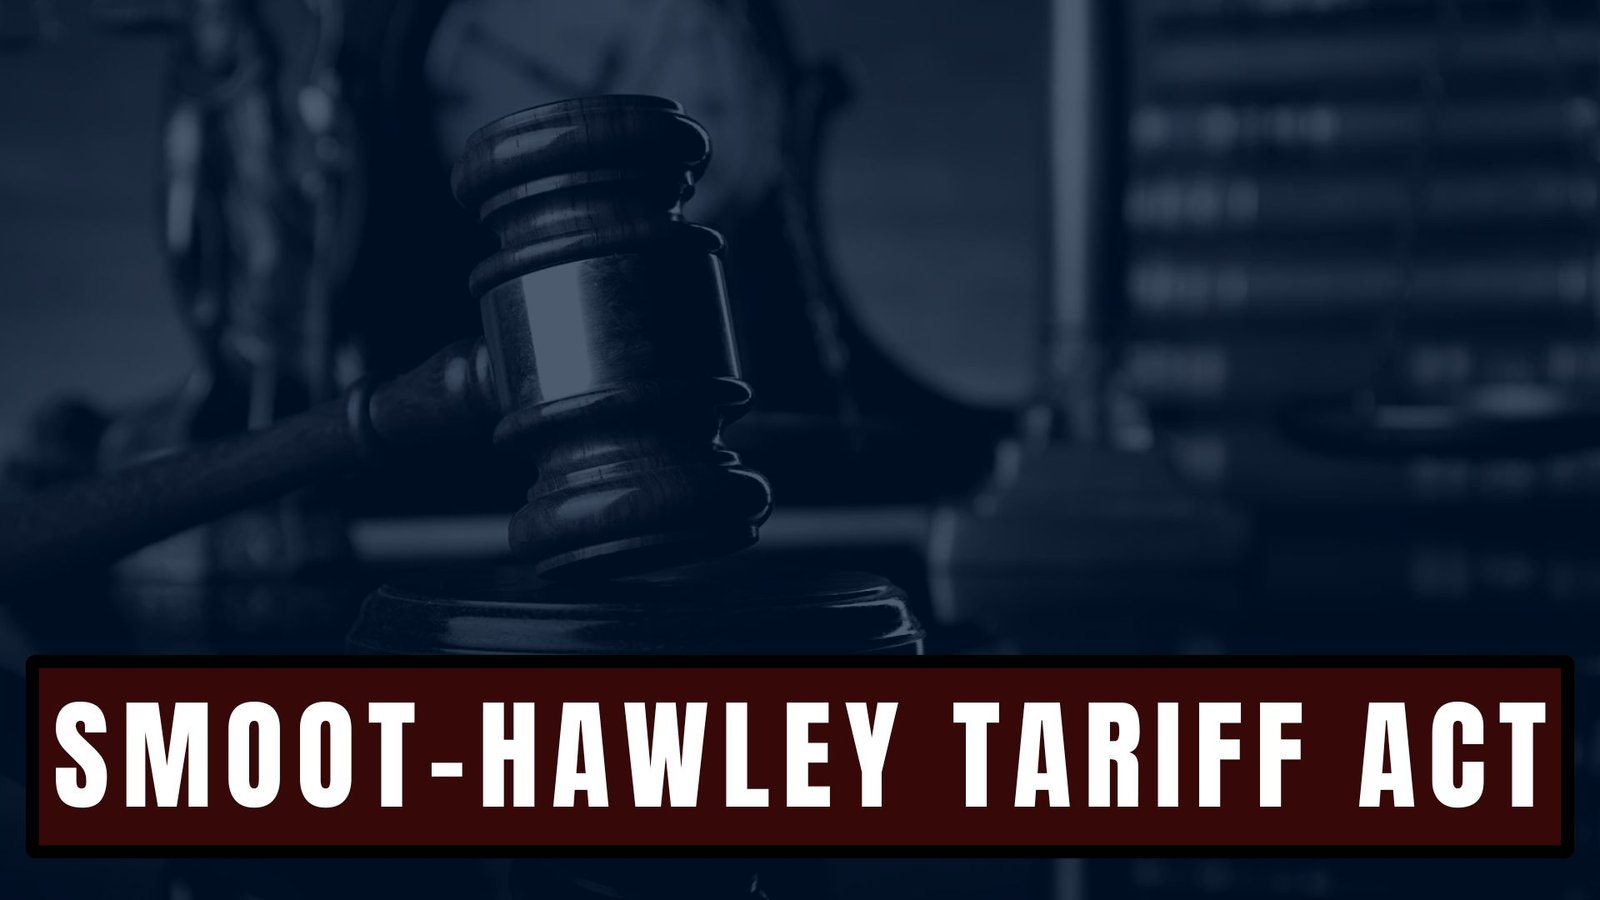 The Smoot-Hawley Tariff Act, Lawforeverything